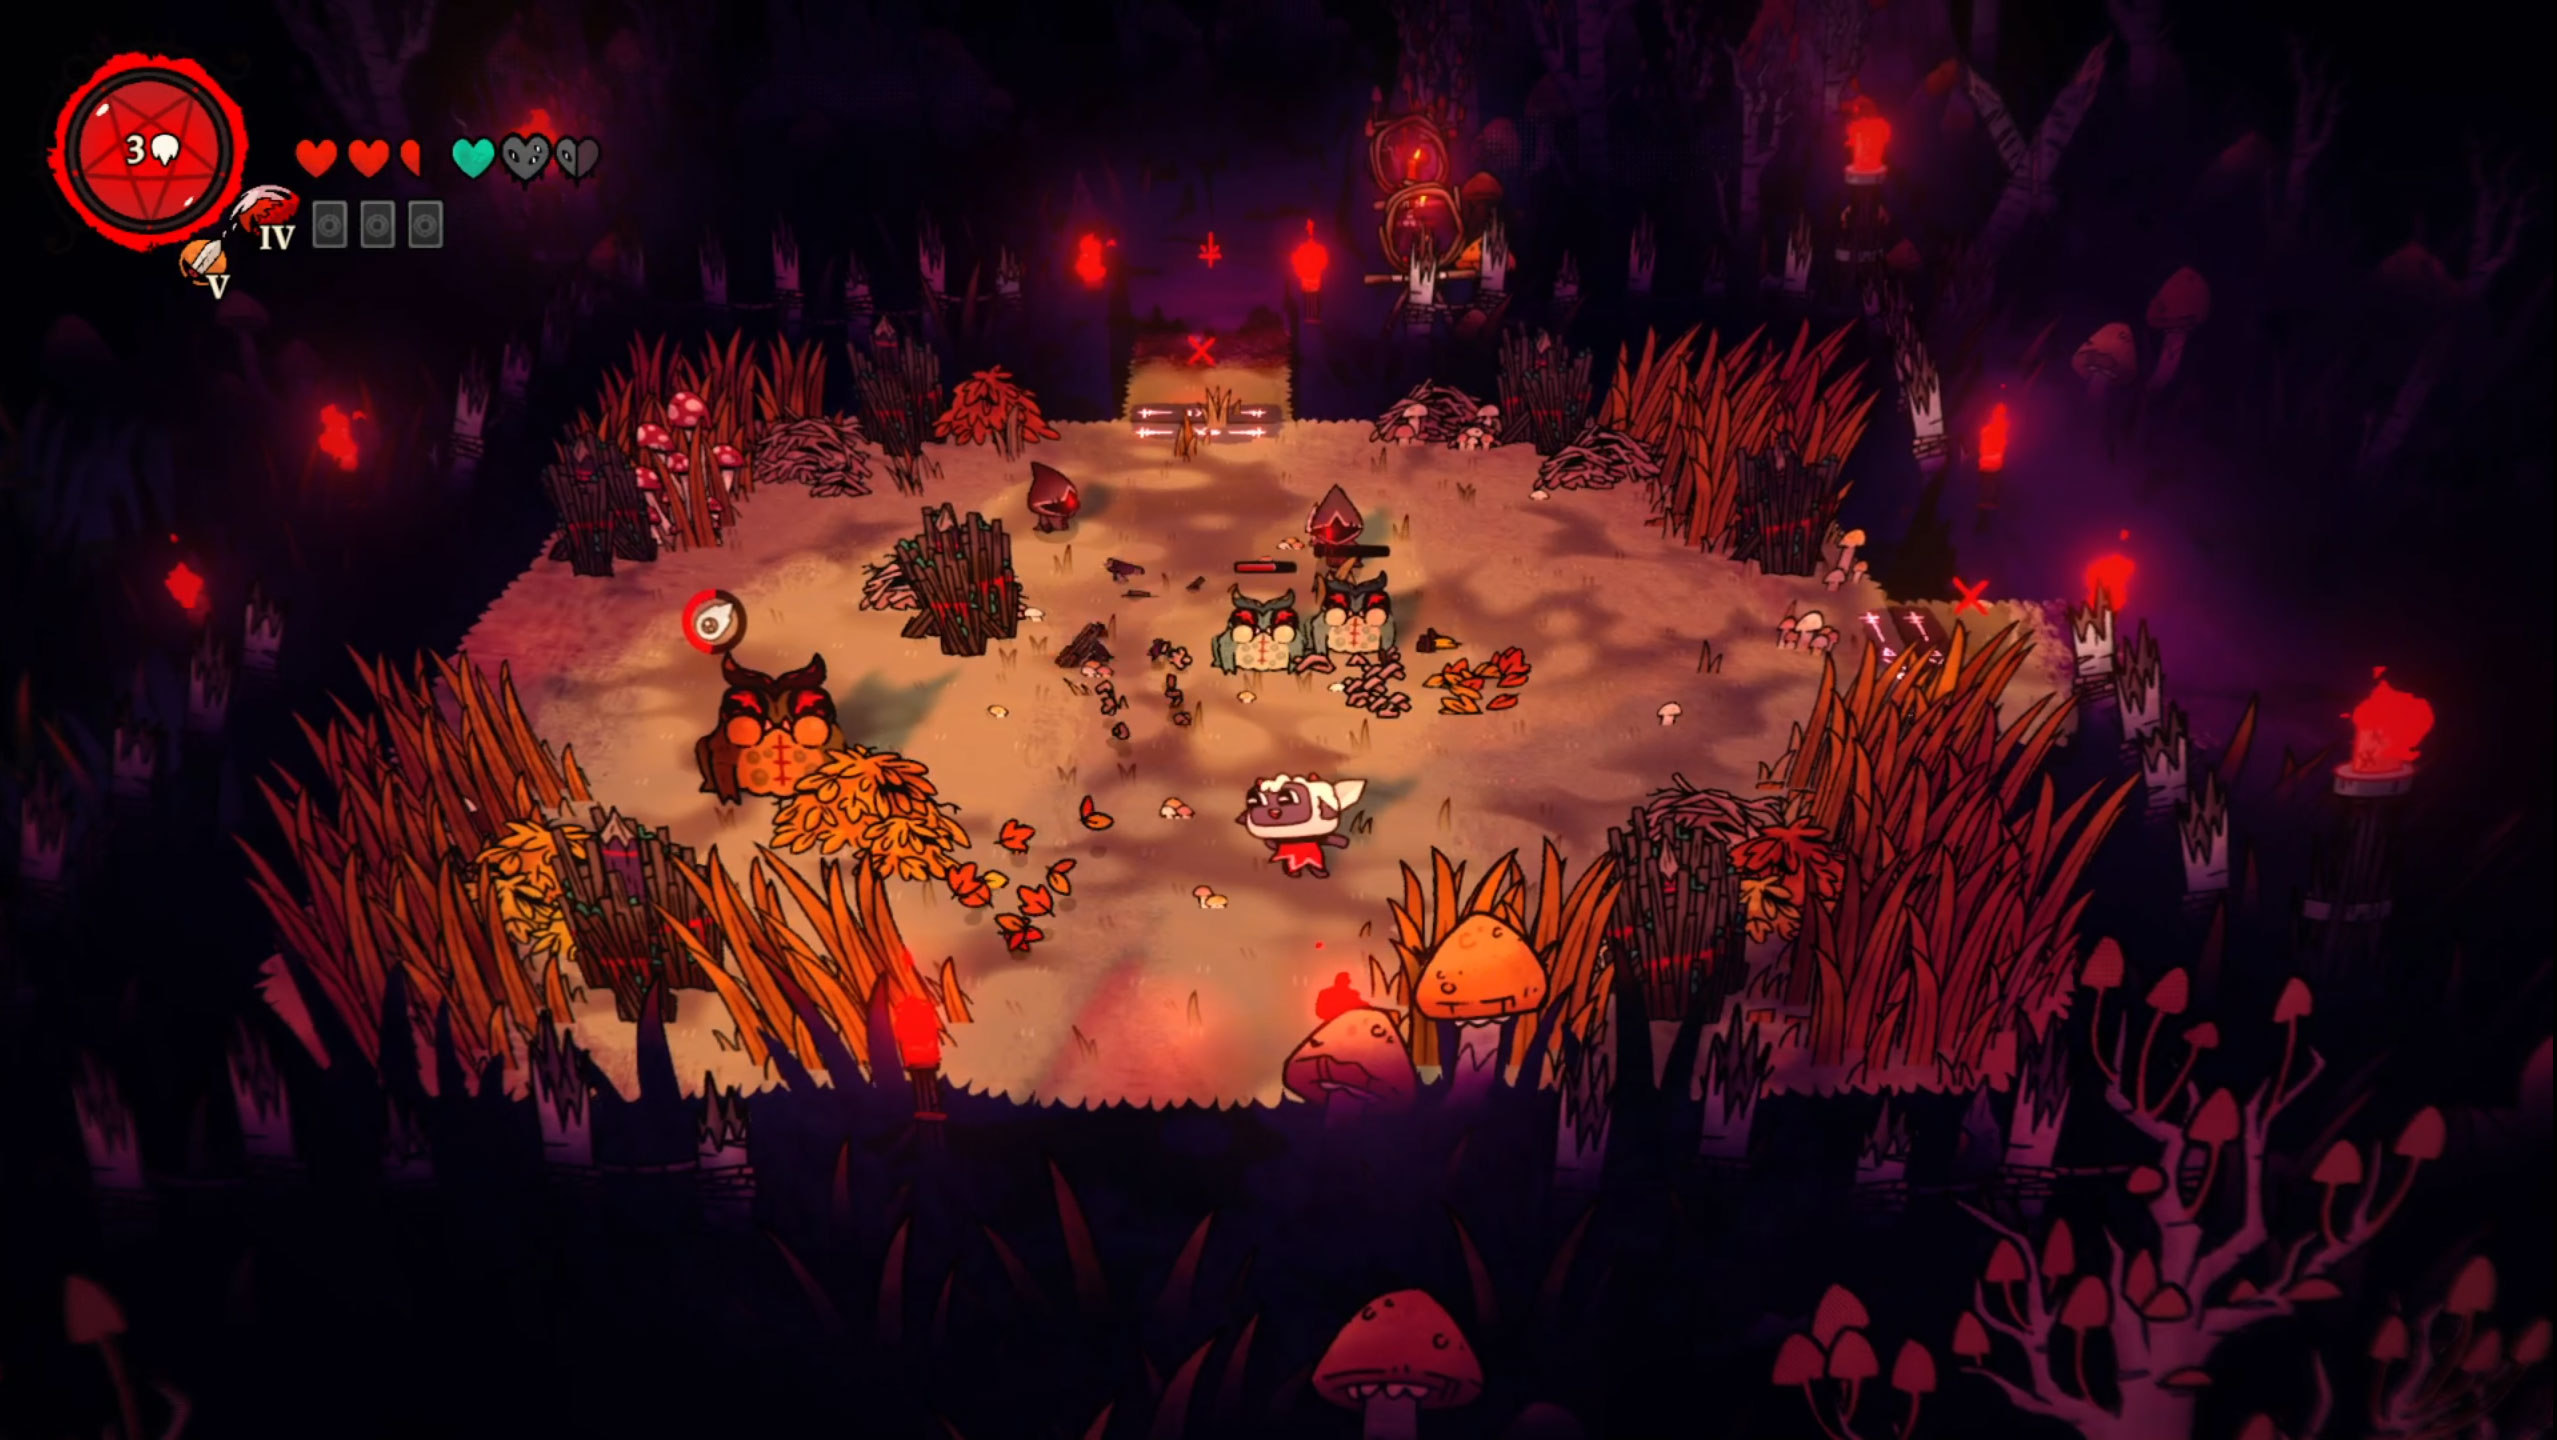 Cult of the Lamb is a Devilishly Cute Roguelite